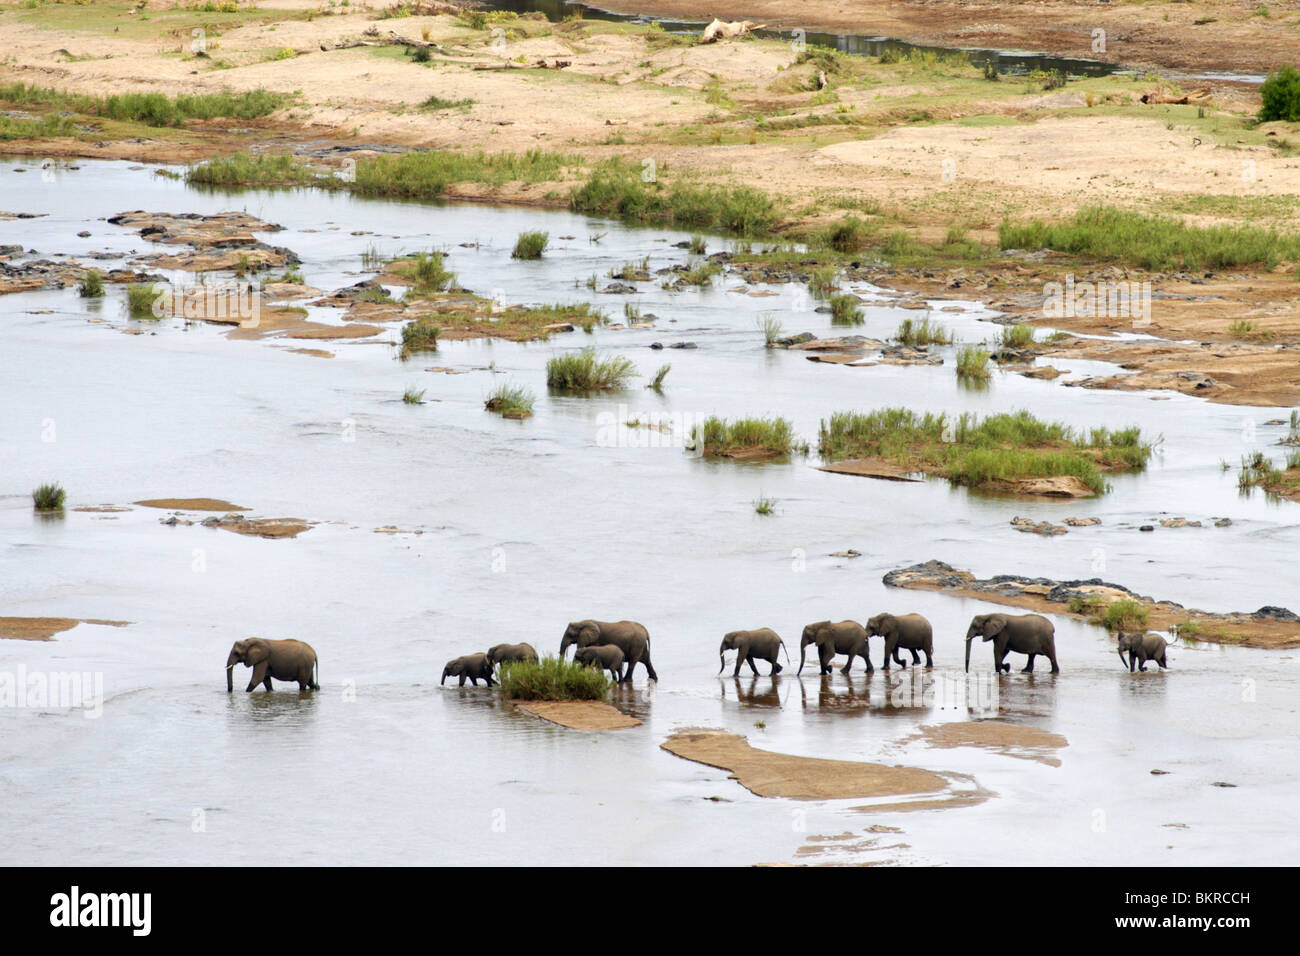 African Elephants in the Olifants River of South Africa Stock Photo